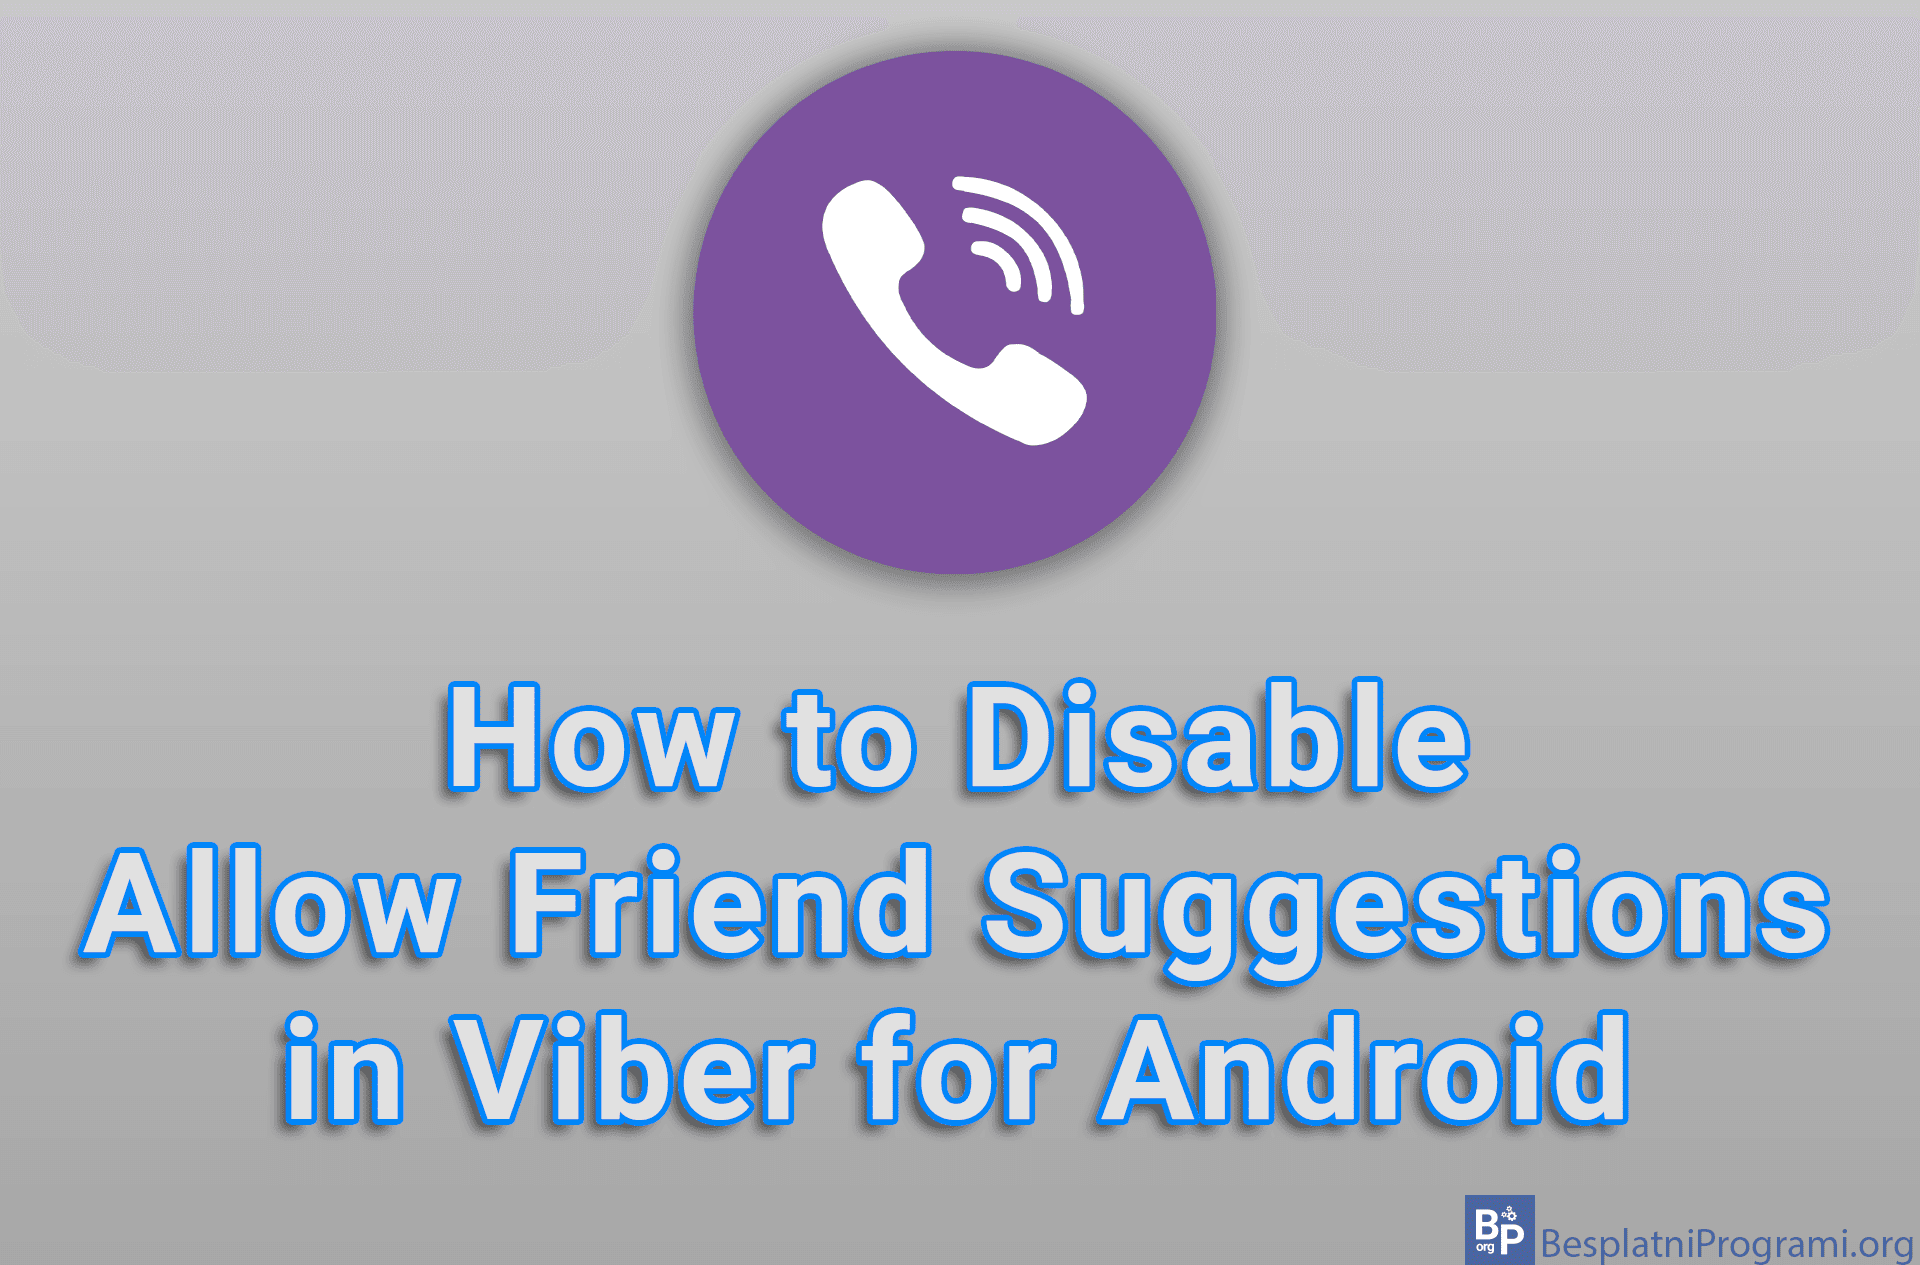 How to Disable Allow Friend Suggestions in Viber for Android